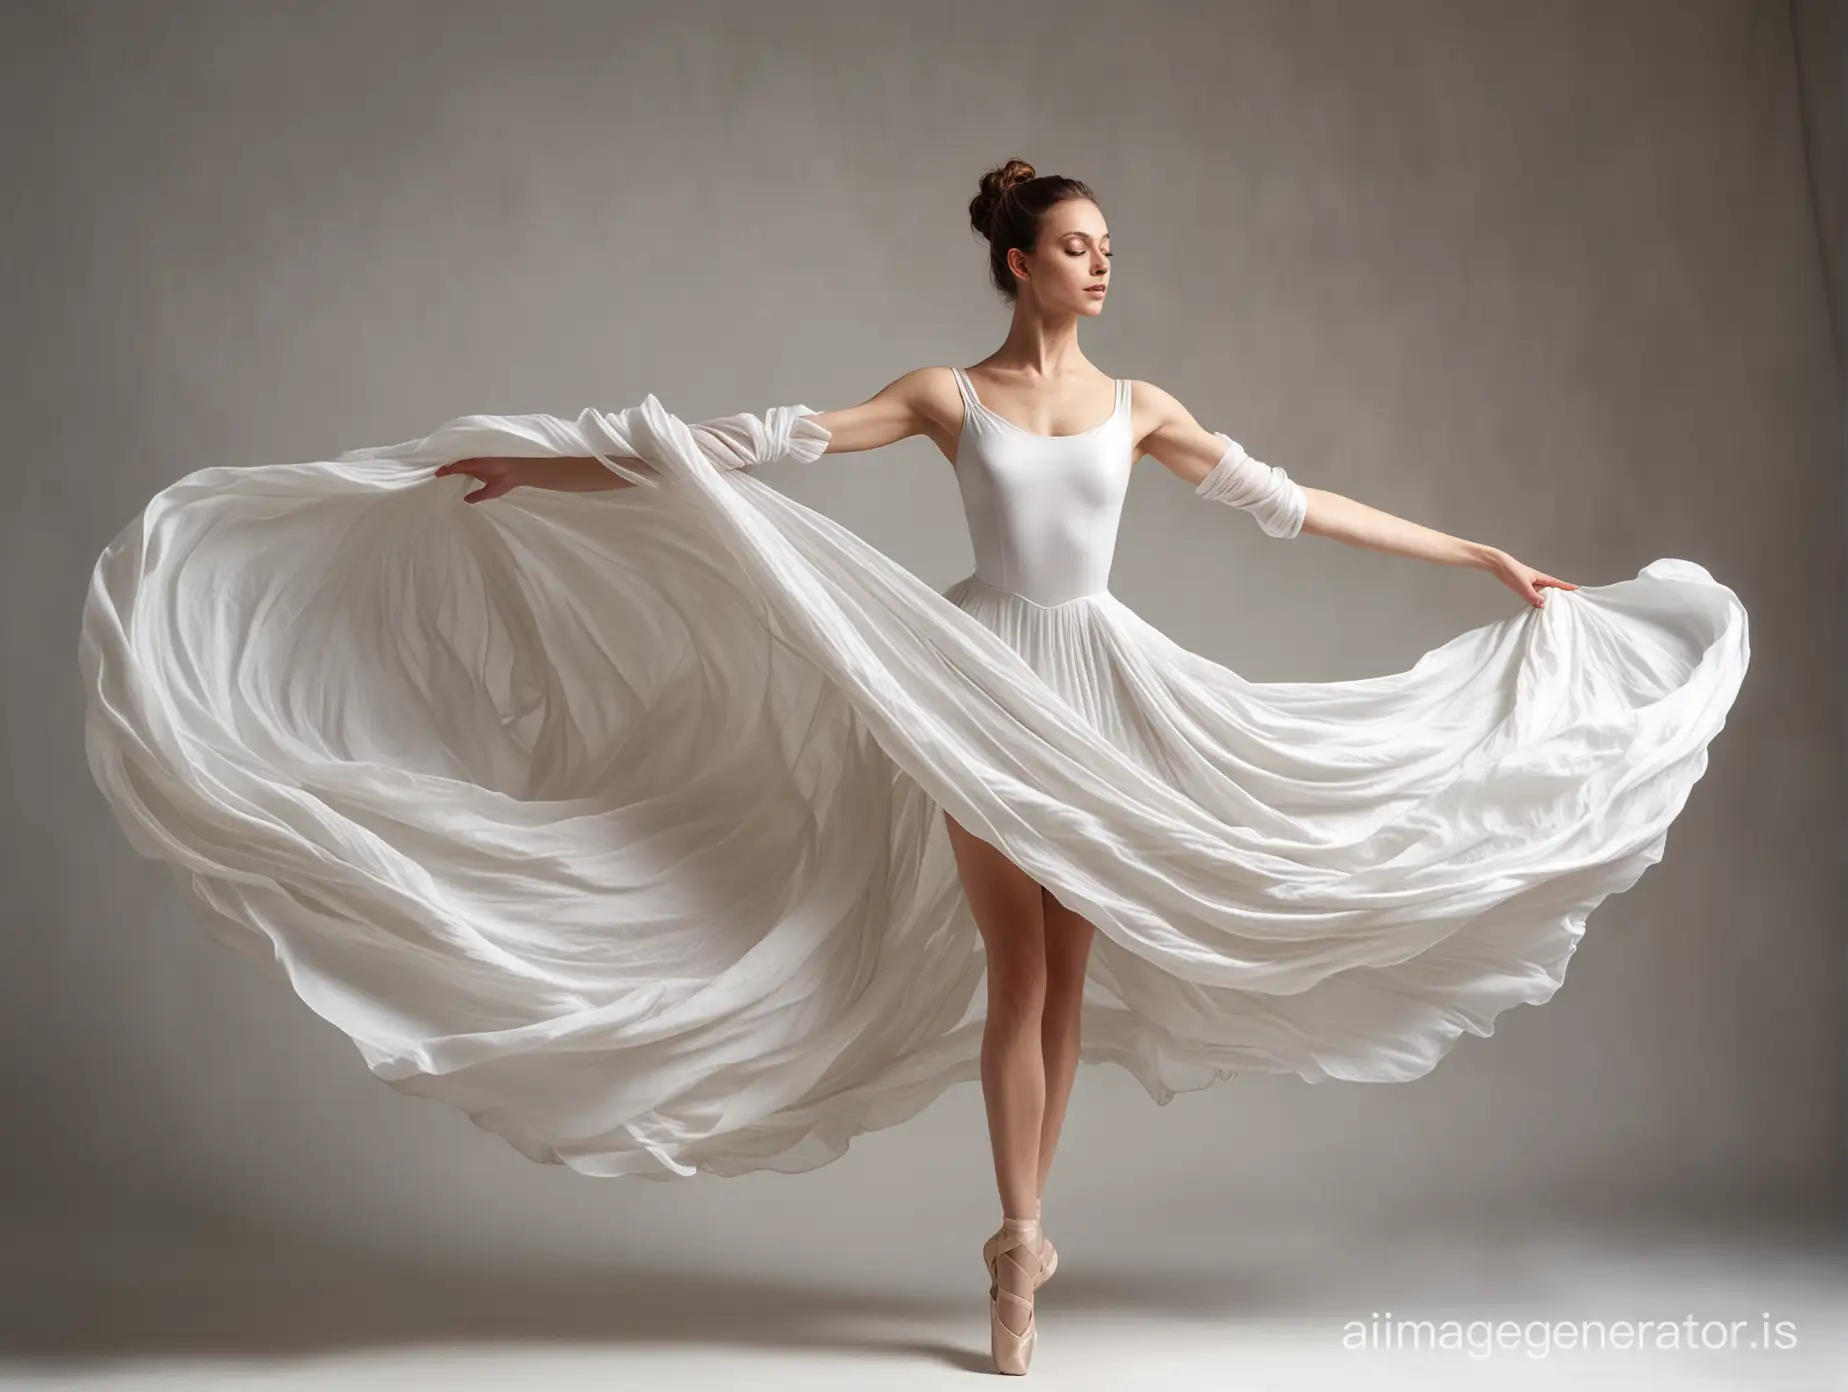 A young beautiful ballerina in a ballet grand jete leap, full length, wearing a long dress, muse of art, surrounded by flowing white silk fabric, intricate folds, dynamic pose, primal energy, high resolution, fashionable photoshoot, Laocoön, complex lighting